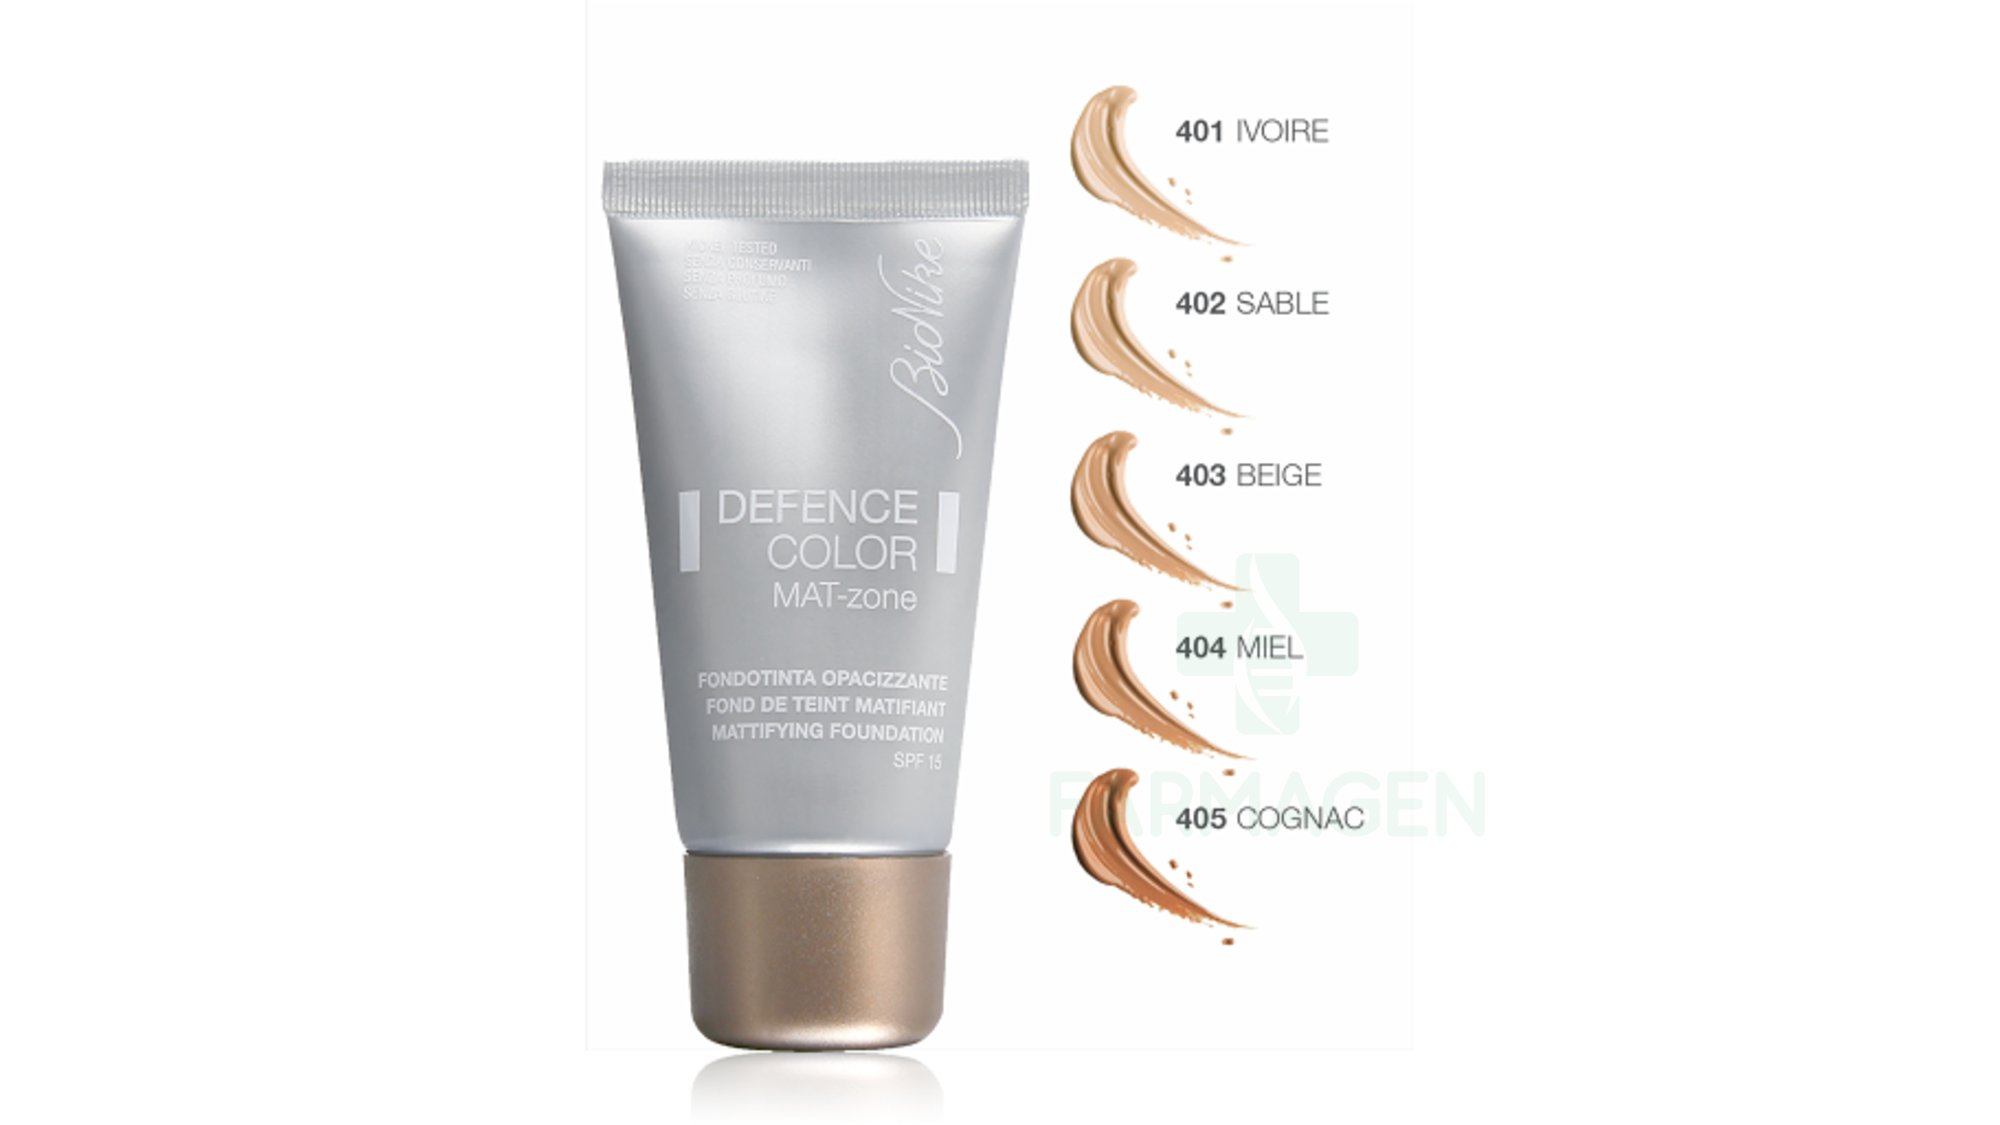 DEFENCE COLOR MATTIFYING FOUNDATION